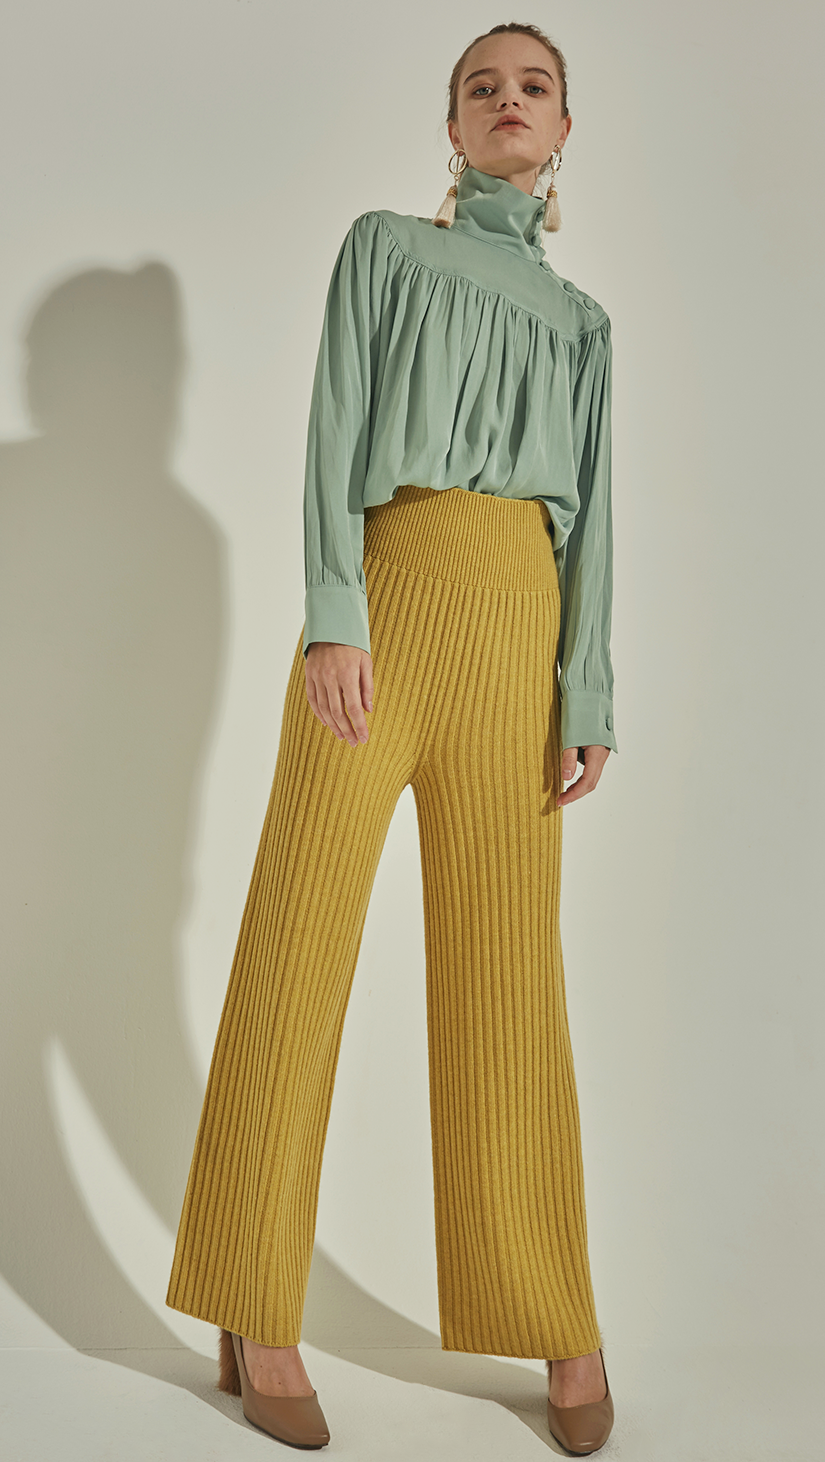 The Mikaela Pant is brick wool trousers sit high on the waist with an elasticated ribbed-knit trim. Wide leg cut. Extra long in length. No pockets. Warm and super soft wool fabric. Relaxed fit. Wholegarment Made.